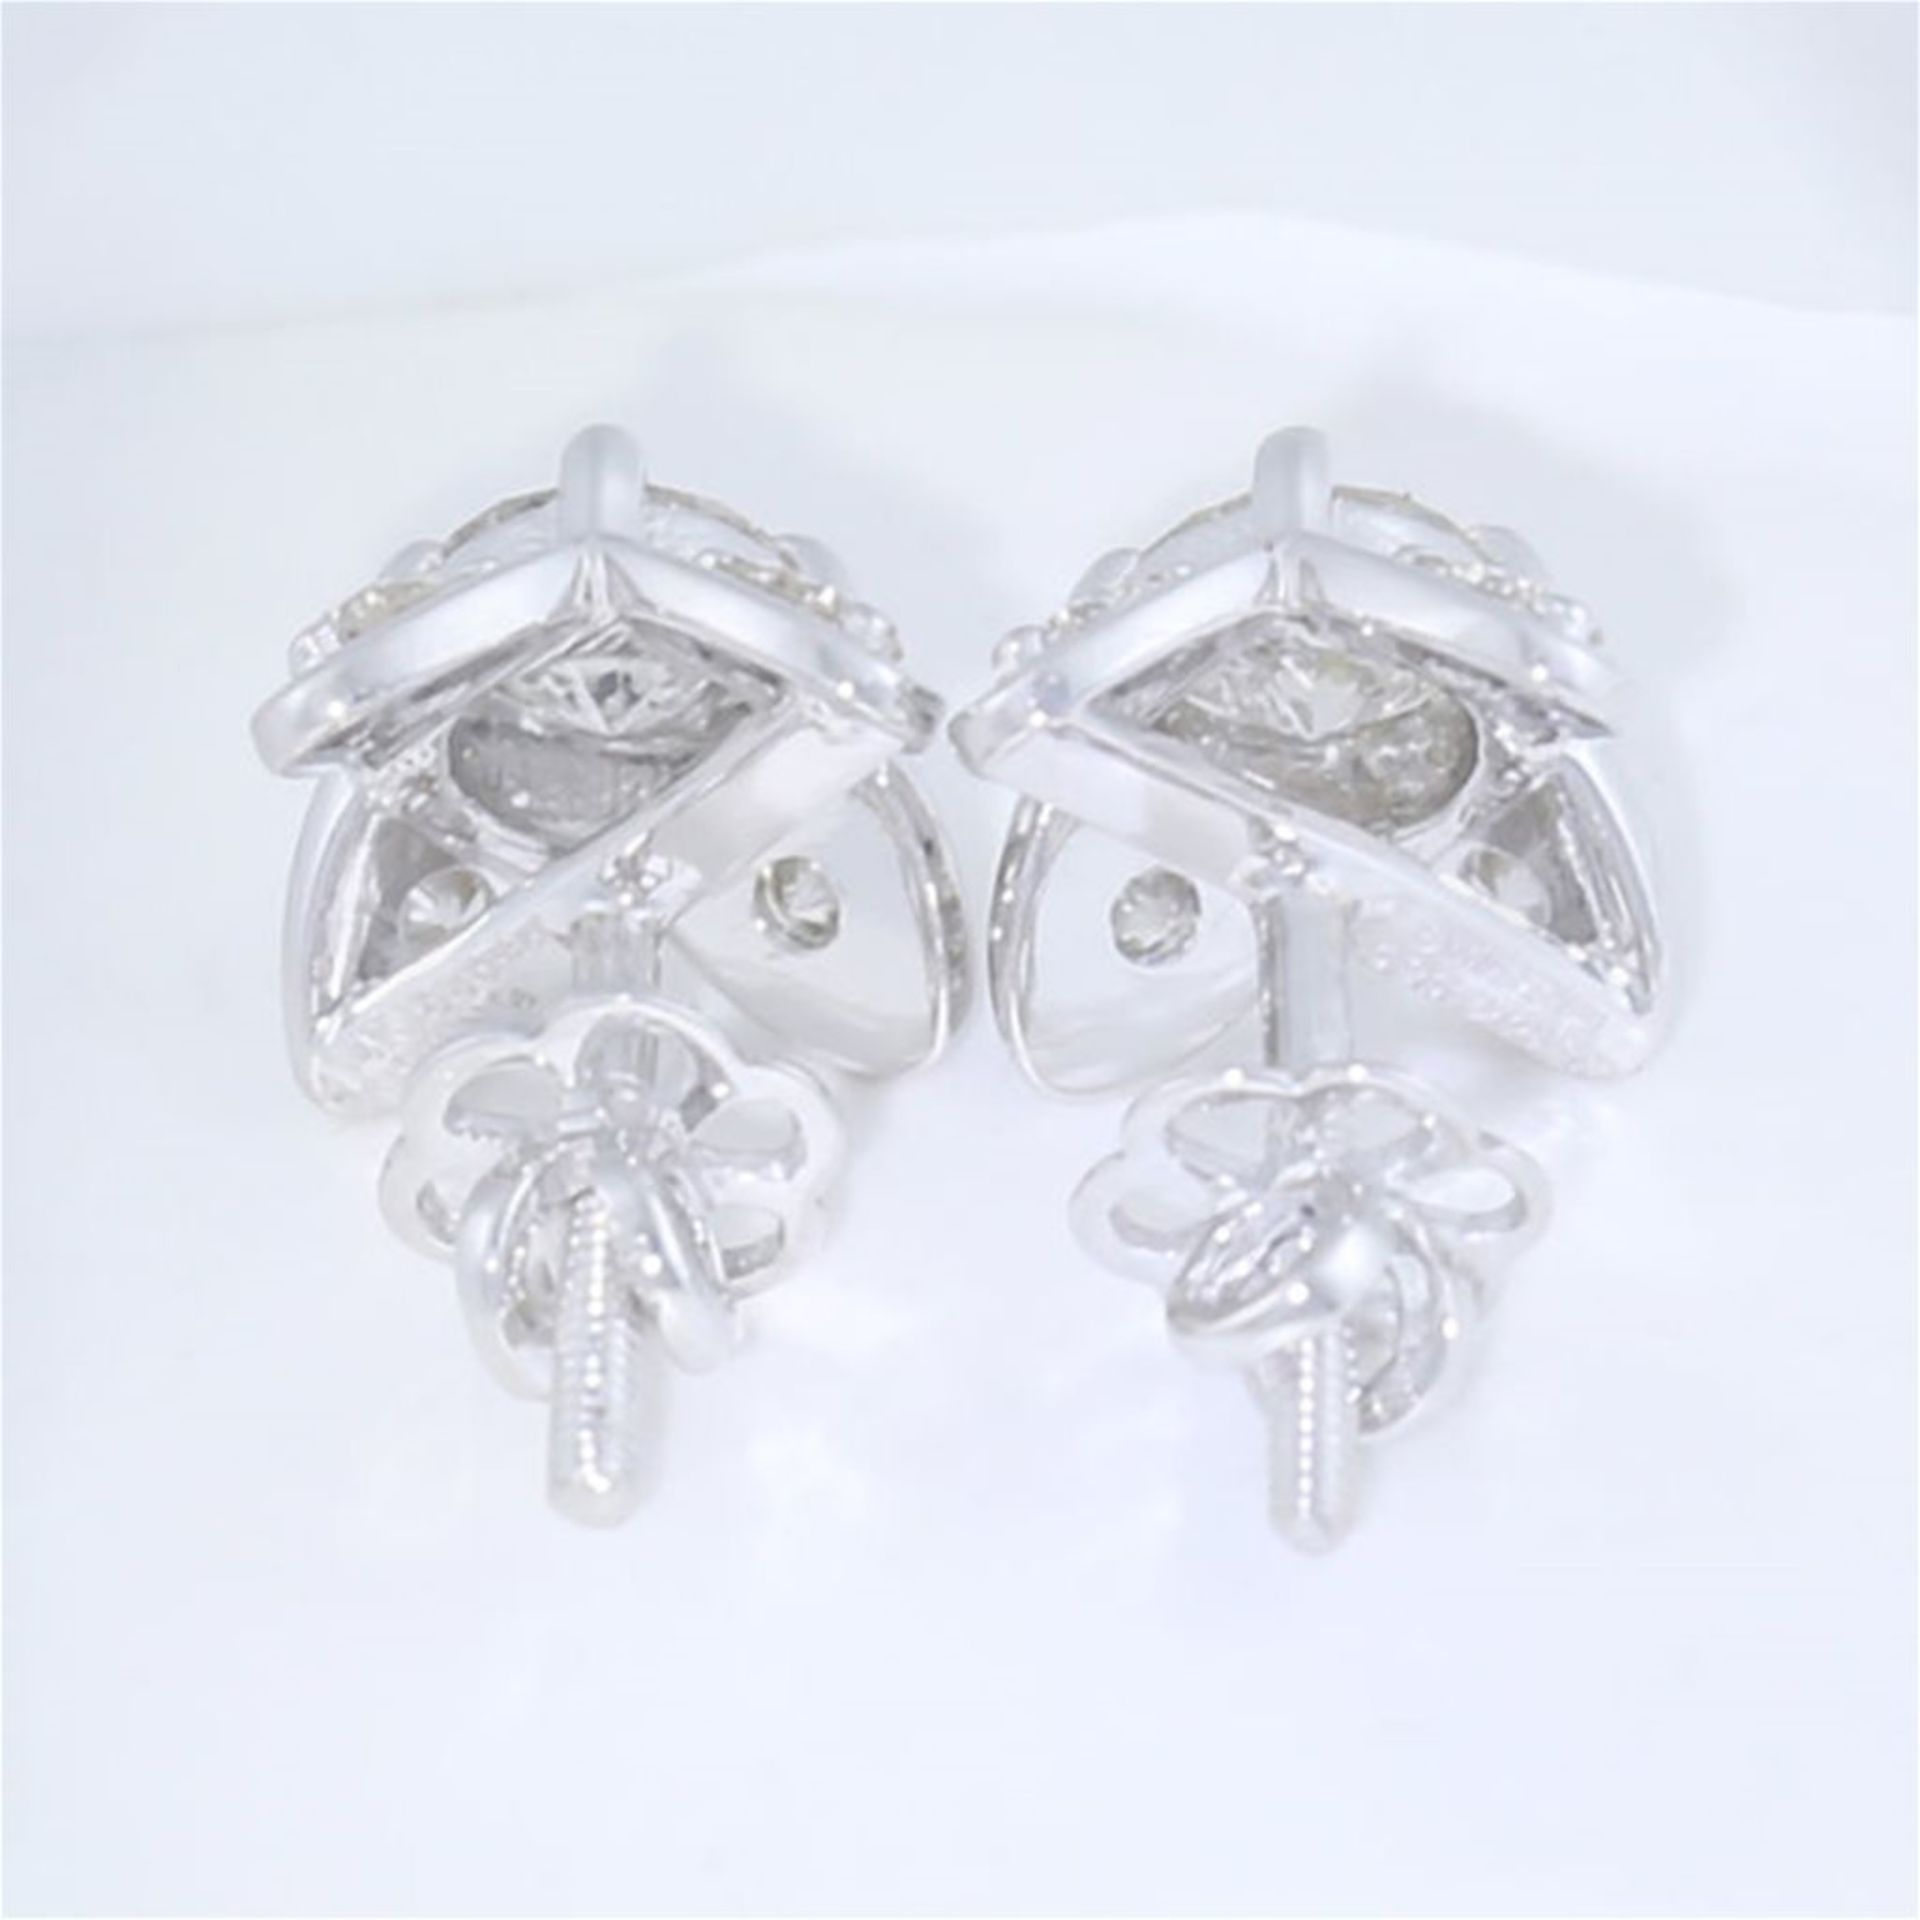 14 K / 585 Very Exclusive White Gold Solitaire Diamond Earrings - Image 3 of 4